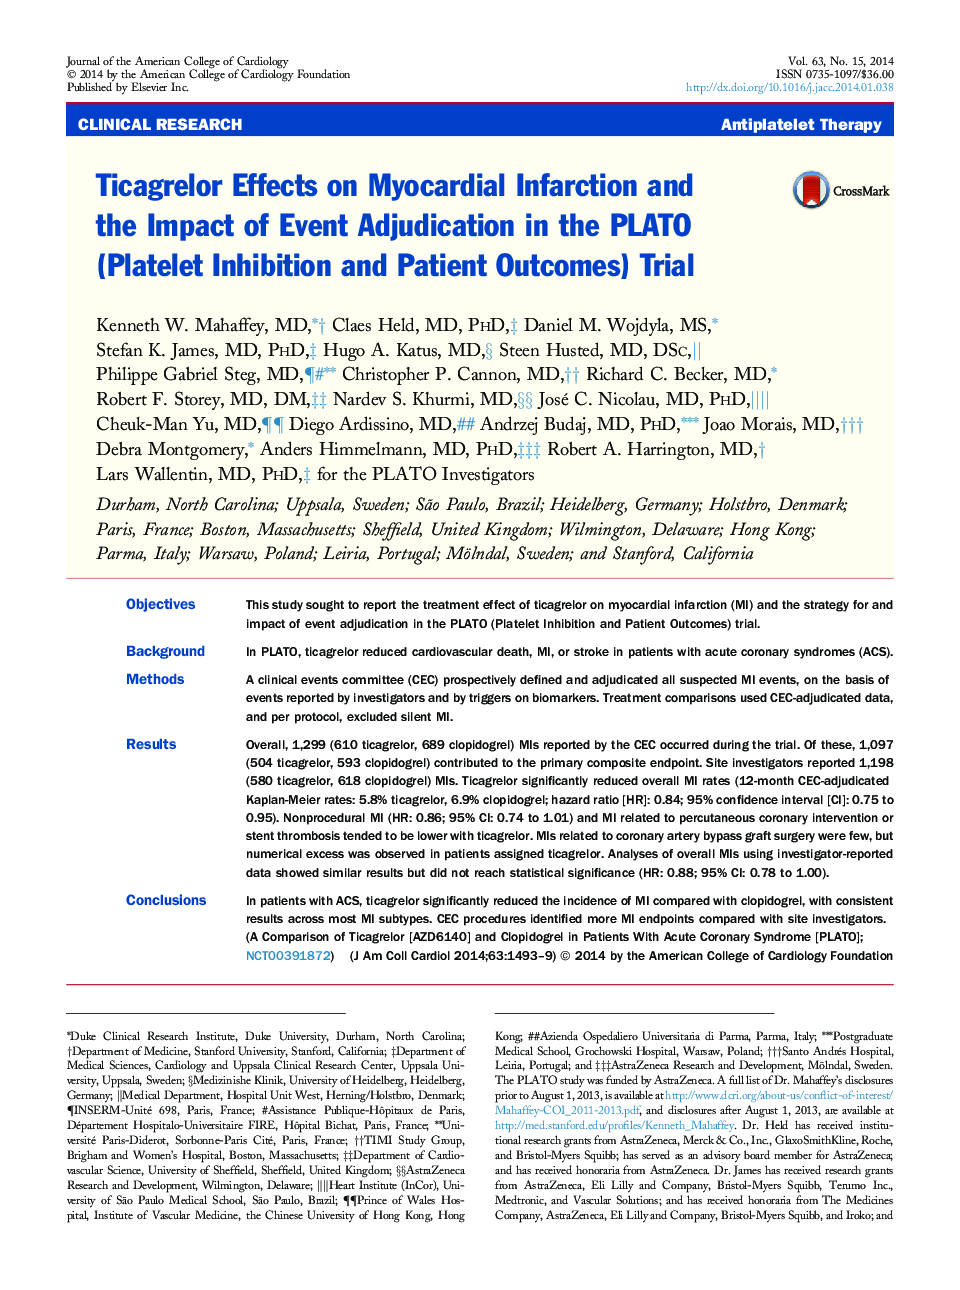 Ticagrelor Effects on Myocardial Infarction and the Impact of Event Adjudication in the PLATO (Platelet Inhibition and Patient Outcomes) Trial 